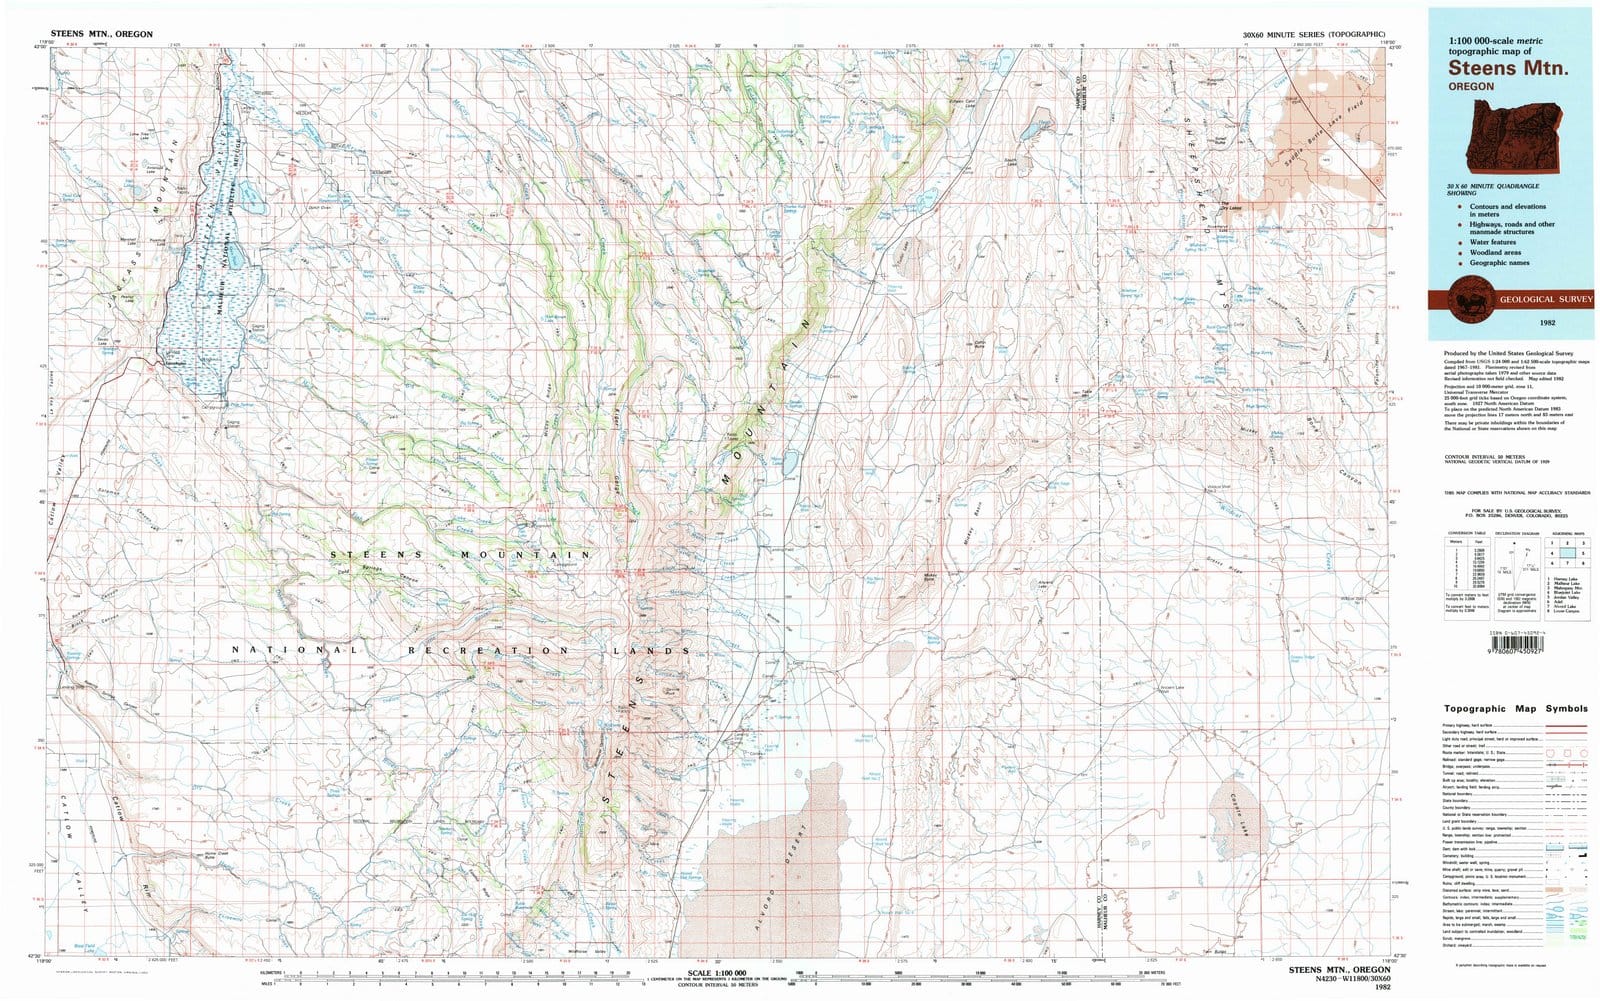 1982 Steens MTN, OR - Oregon - USGS Topographic Map